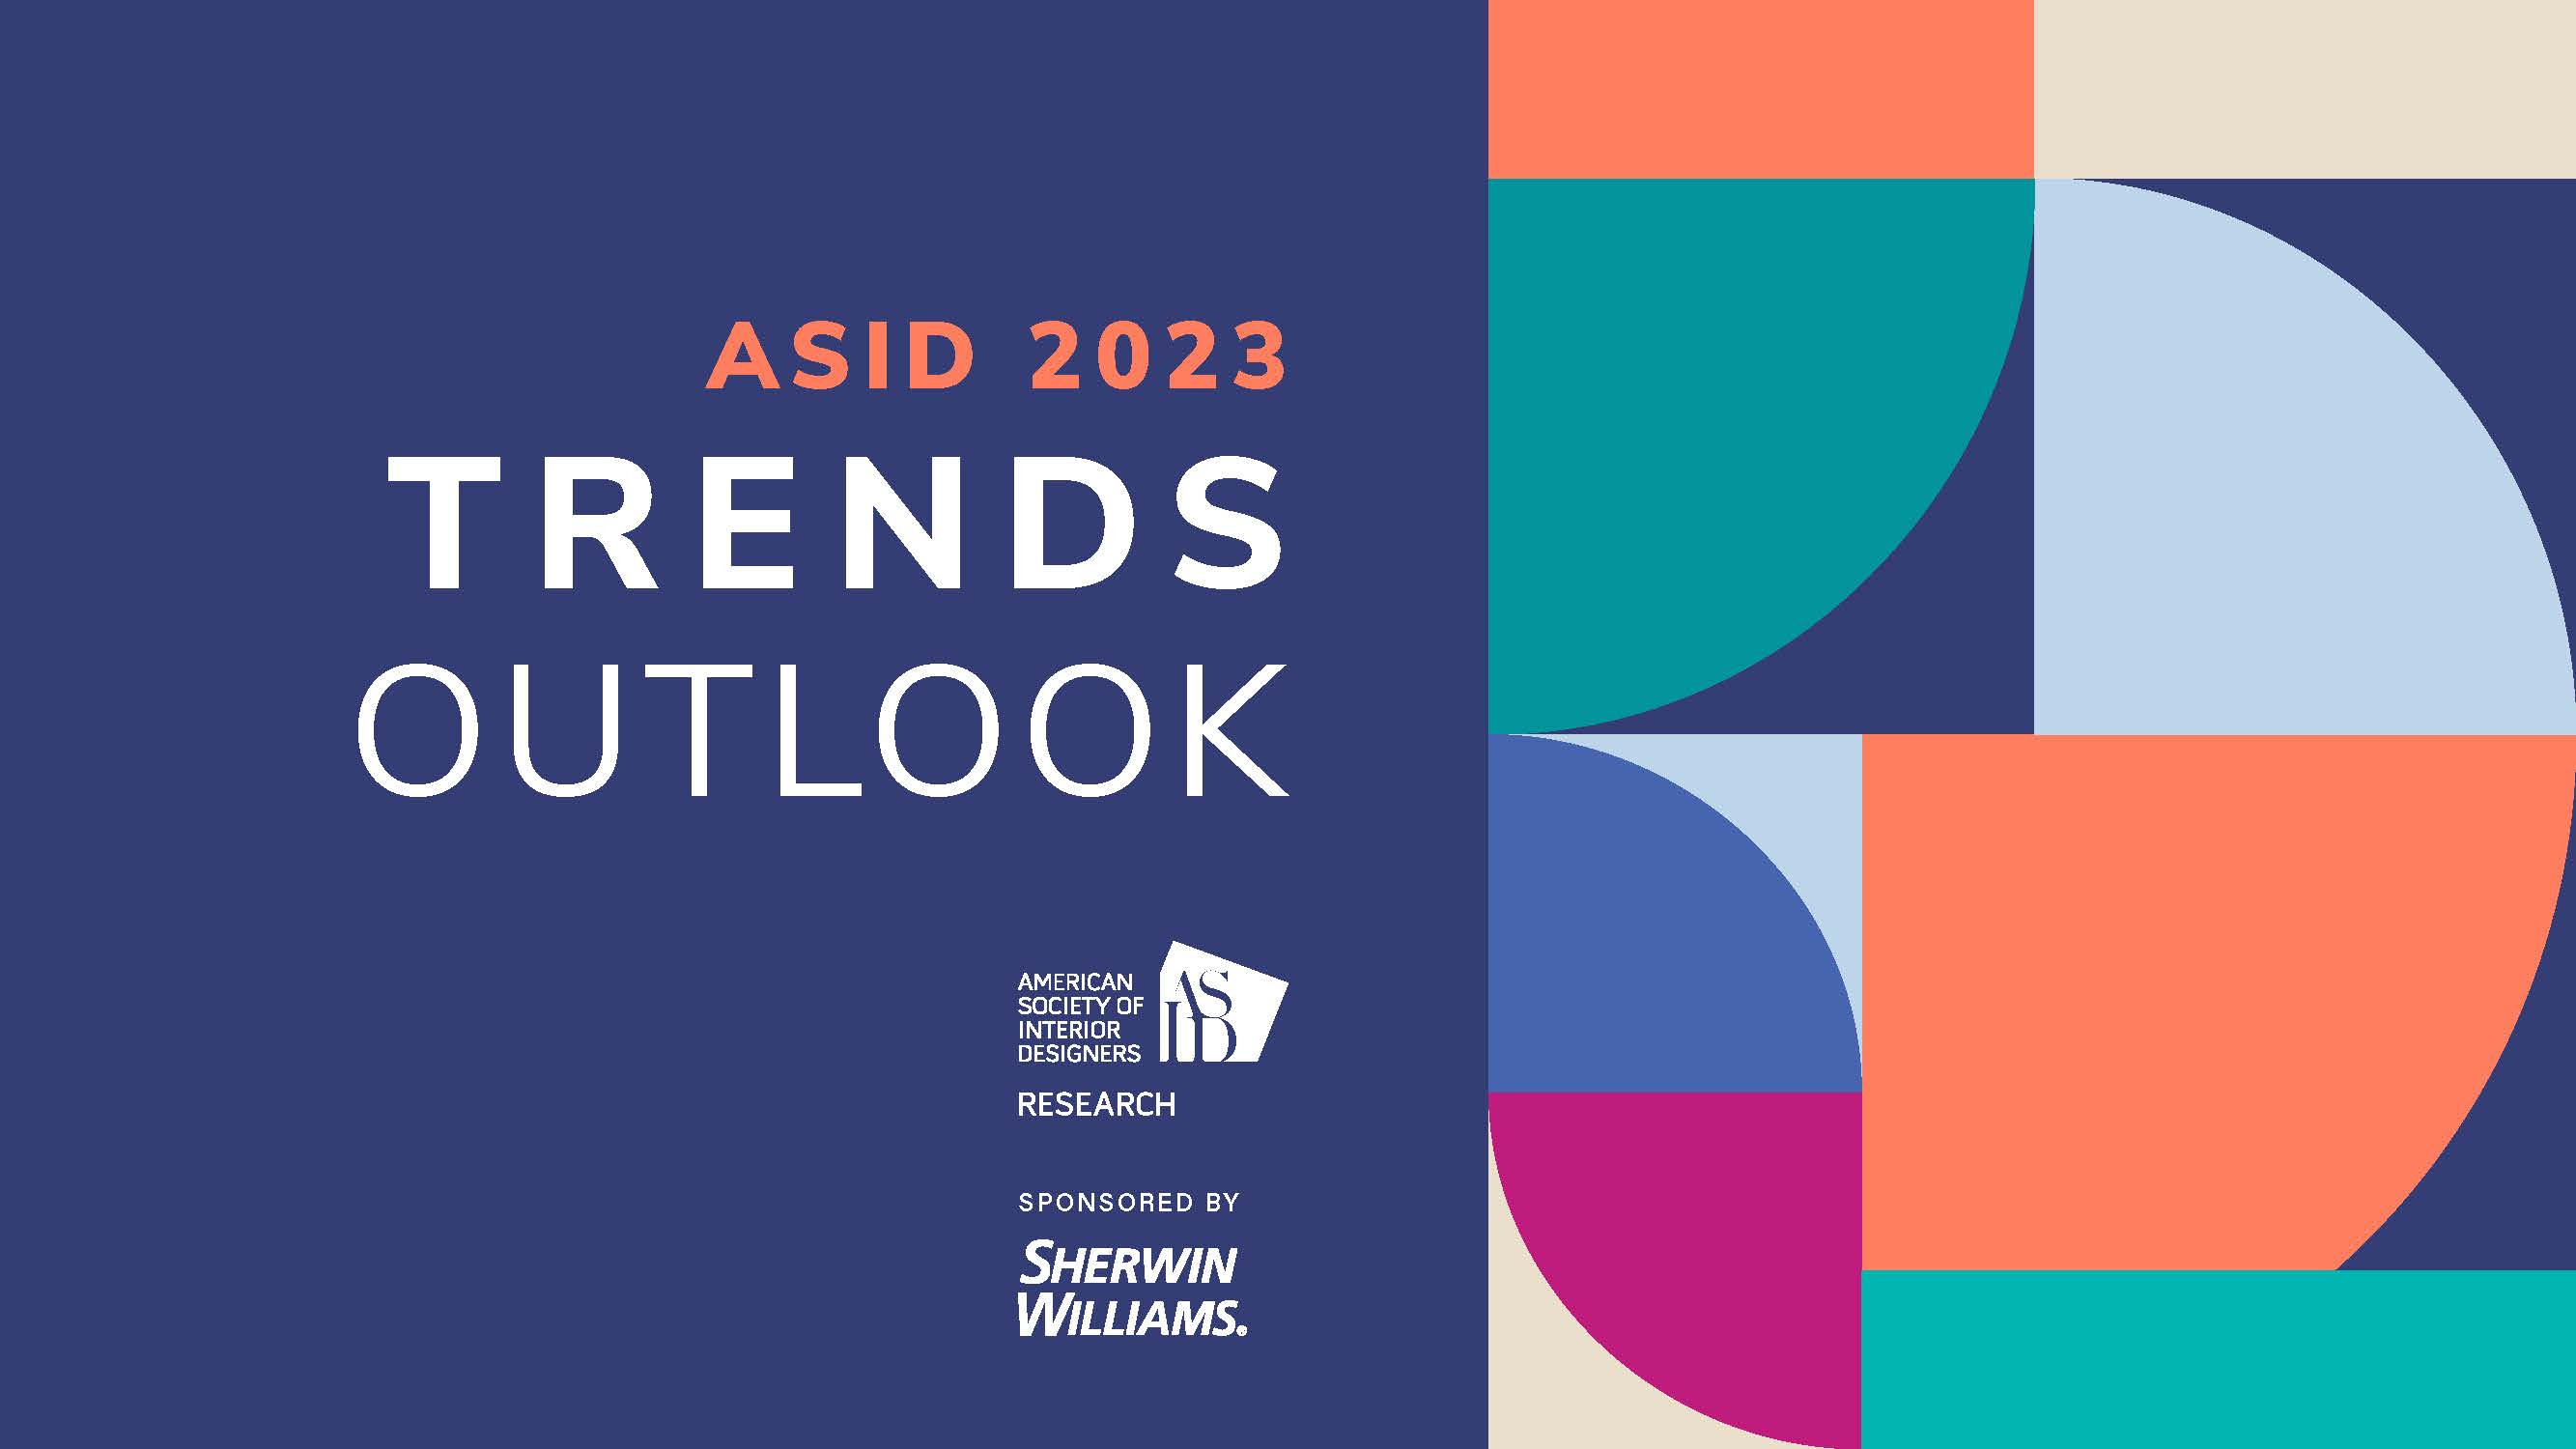 ASID 2023 Trends Report colorful geometric cover image